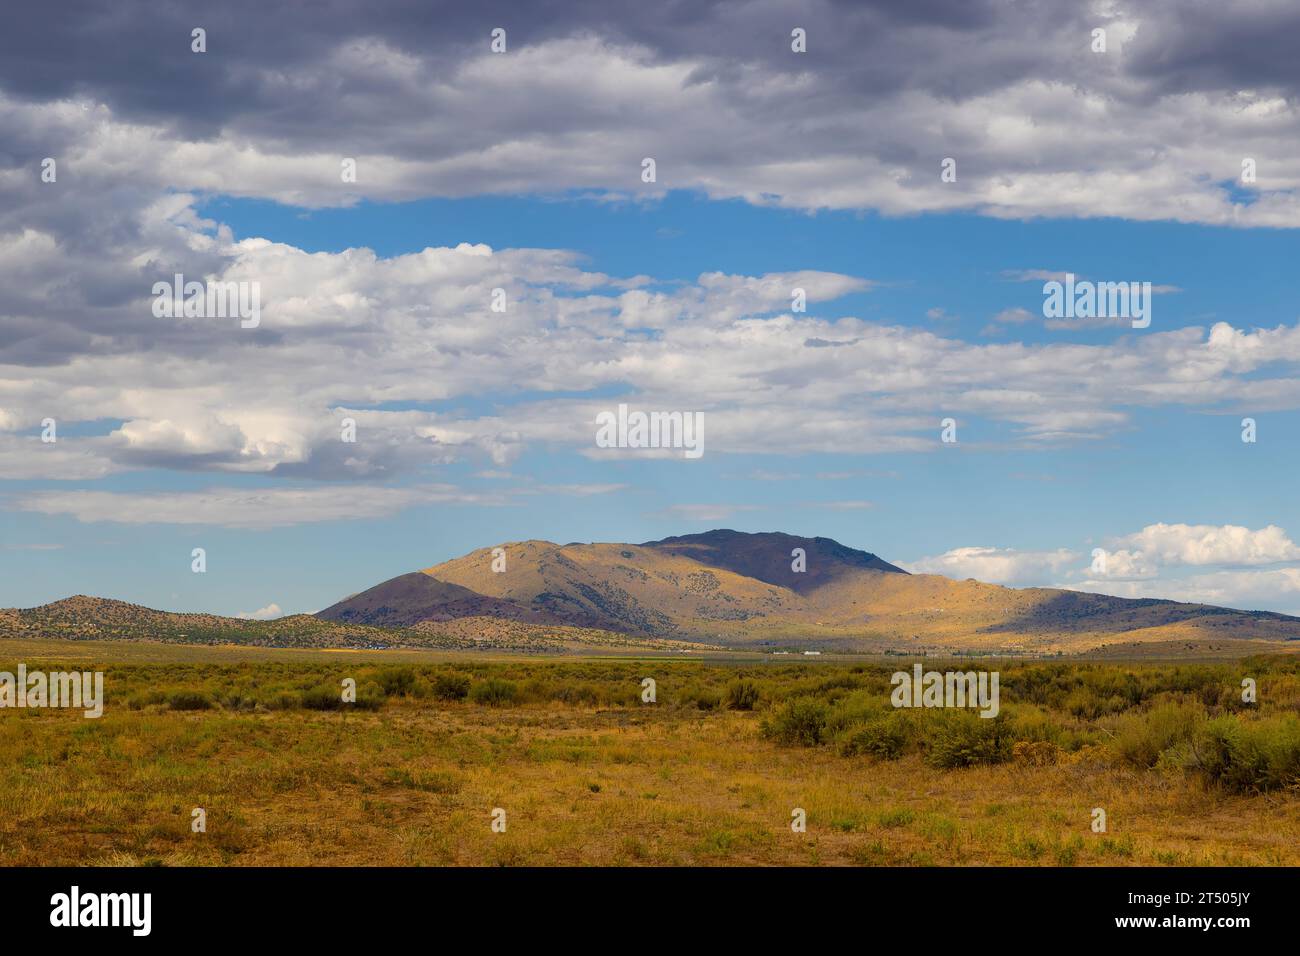 Clouds above the mountains in this landscape view from Stead Airport in Nevada. Stock Photo